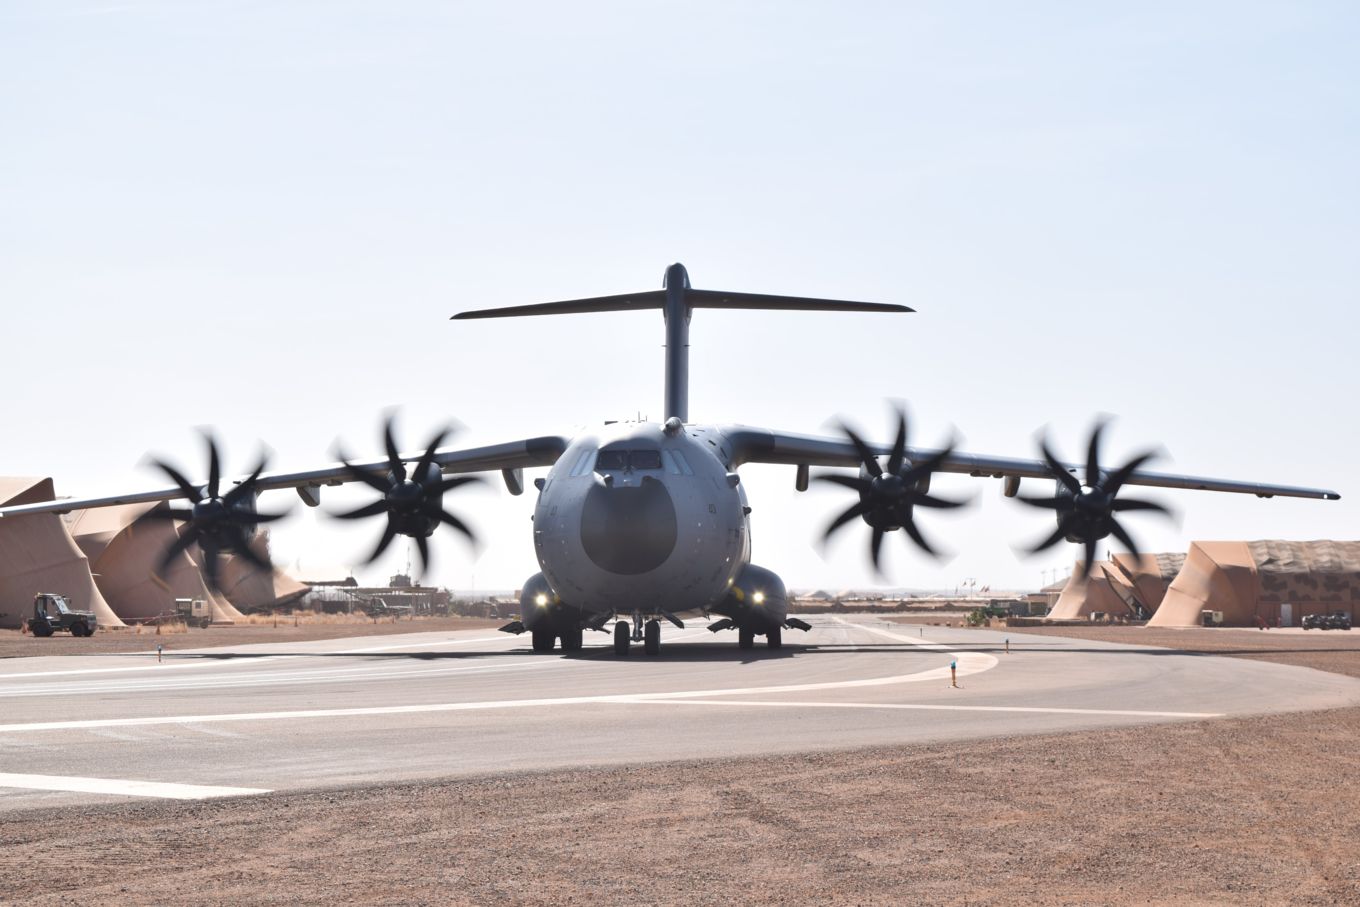 Image shows an RAF A400M Atlas aircraft on the ground.